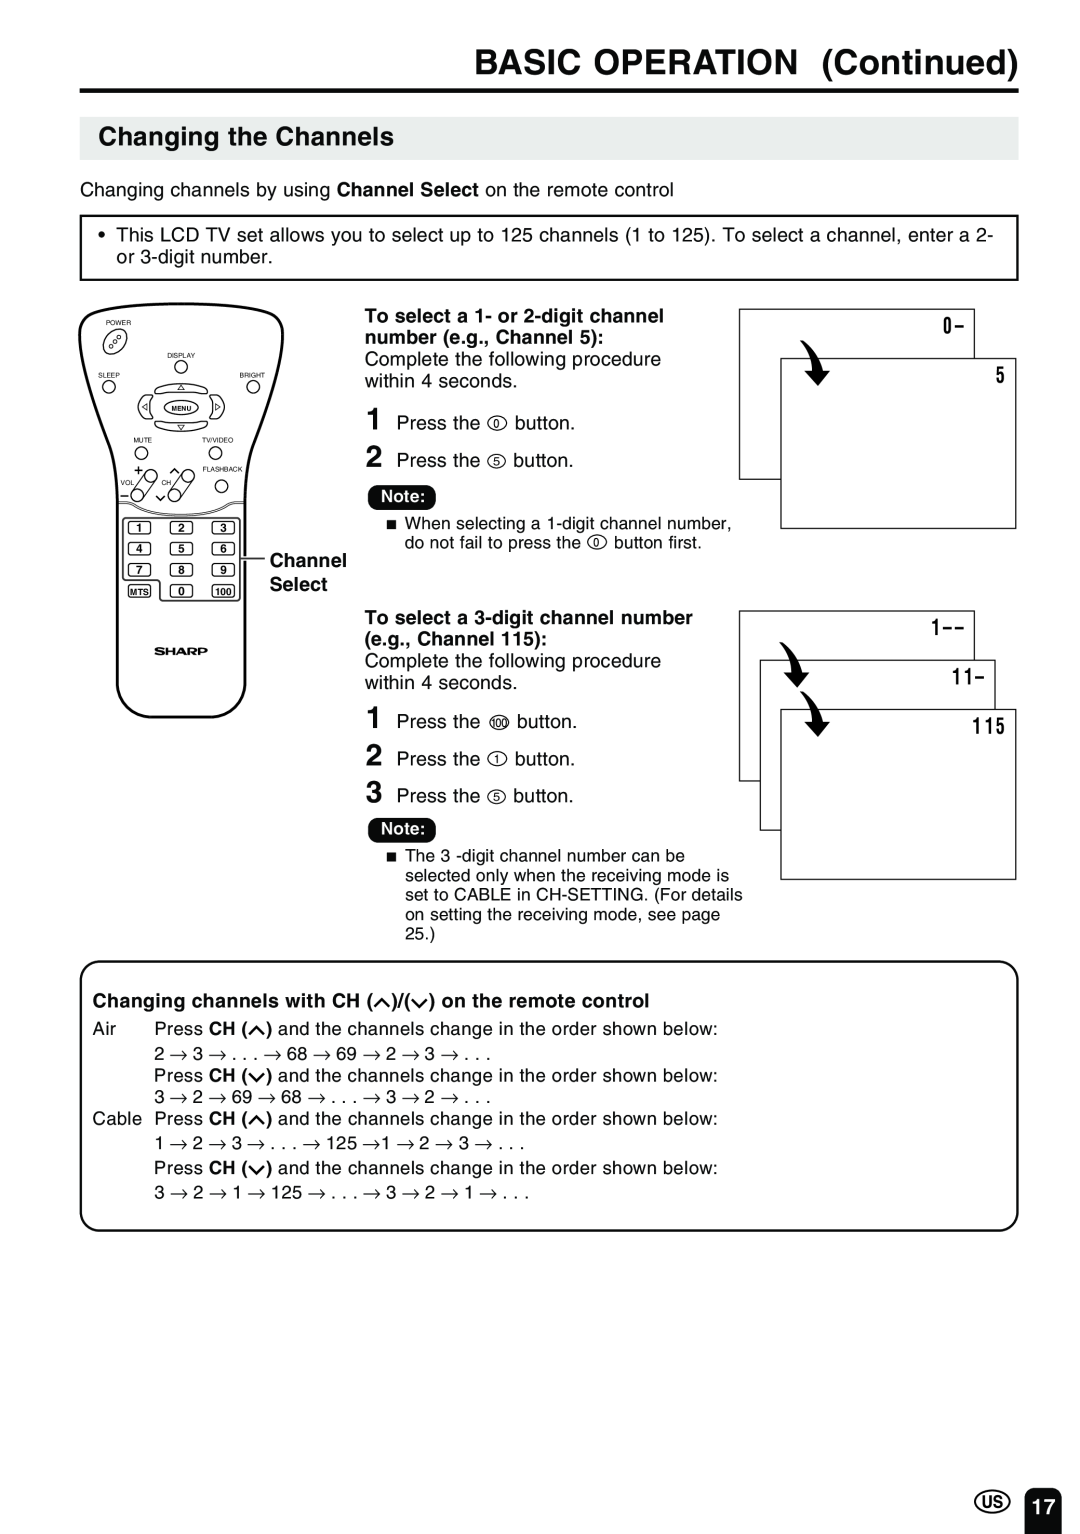 Sharp LC-20B2UA operation manual Changing the Channels, MTS 0 100 Select To select a 3-digit channel number e.g., Channel 